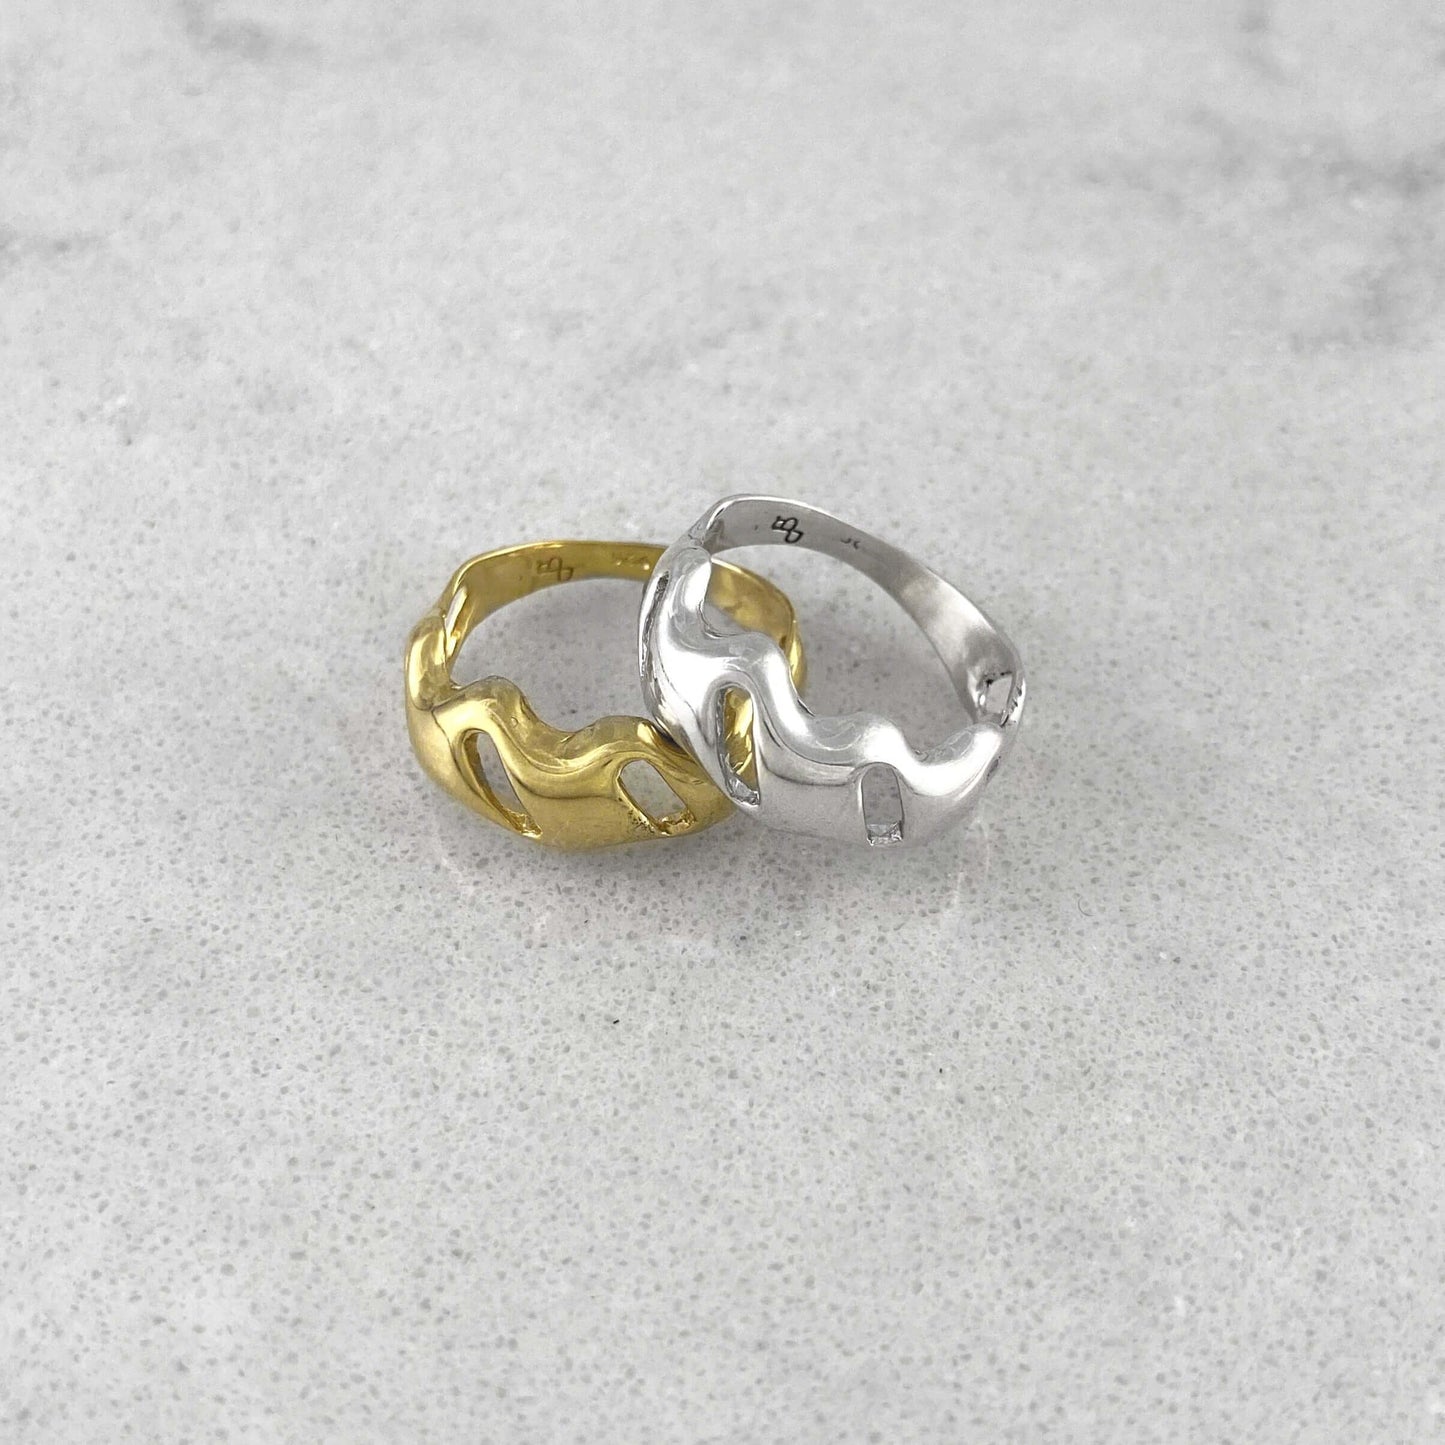 Product photo of two rings, one in silver and one in gold